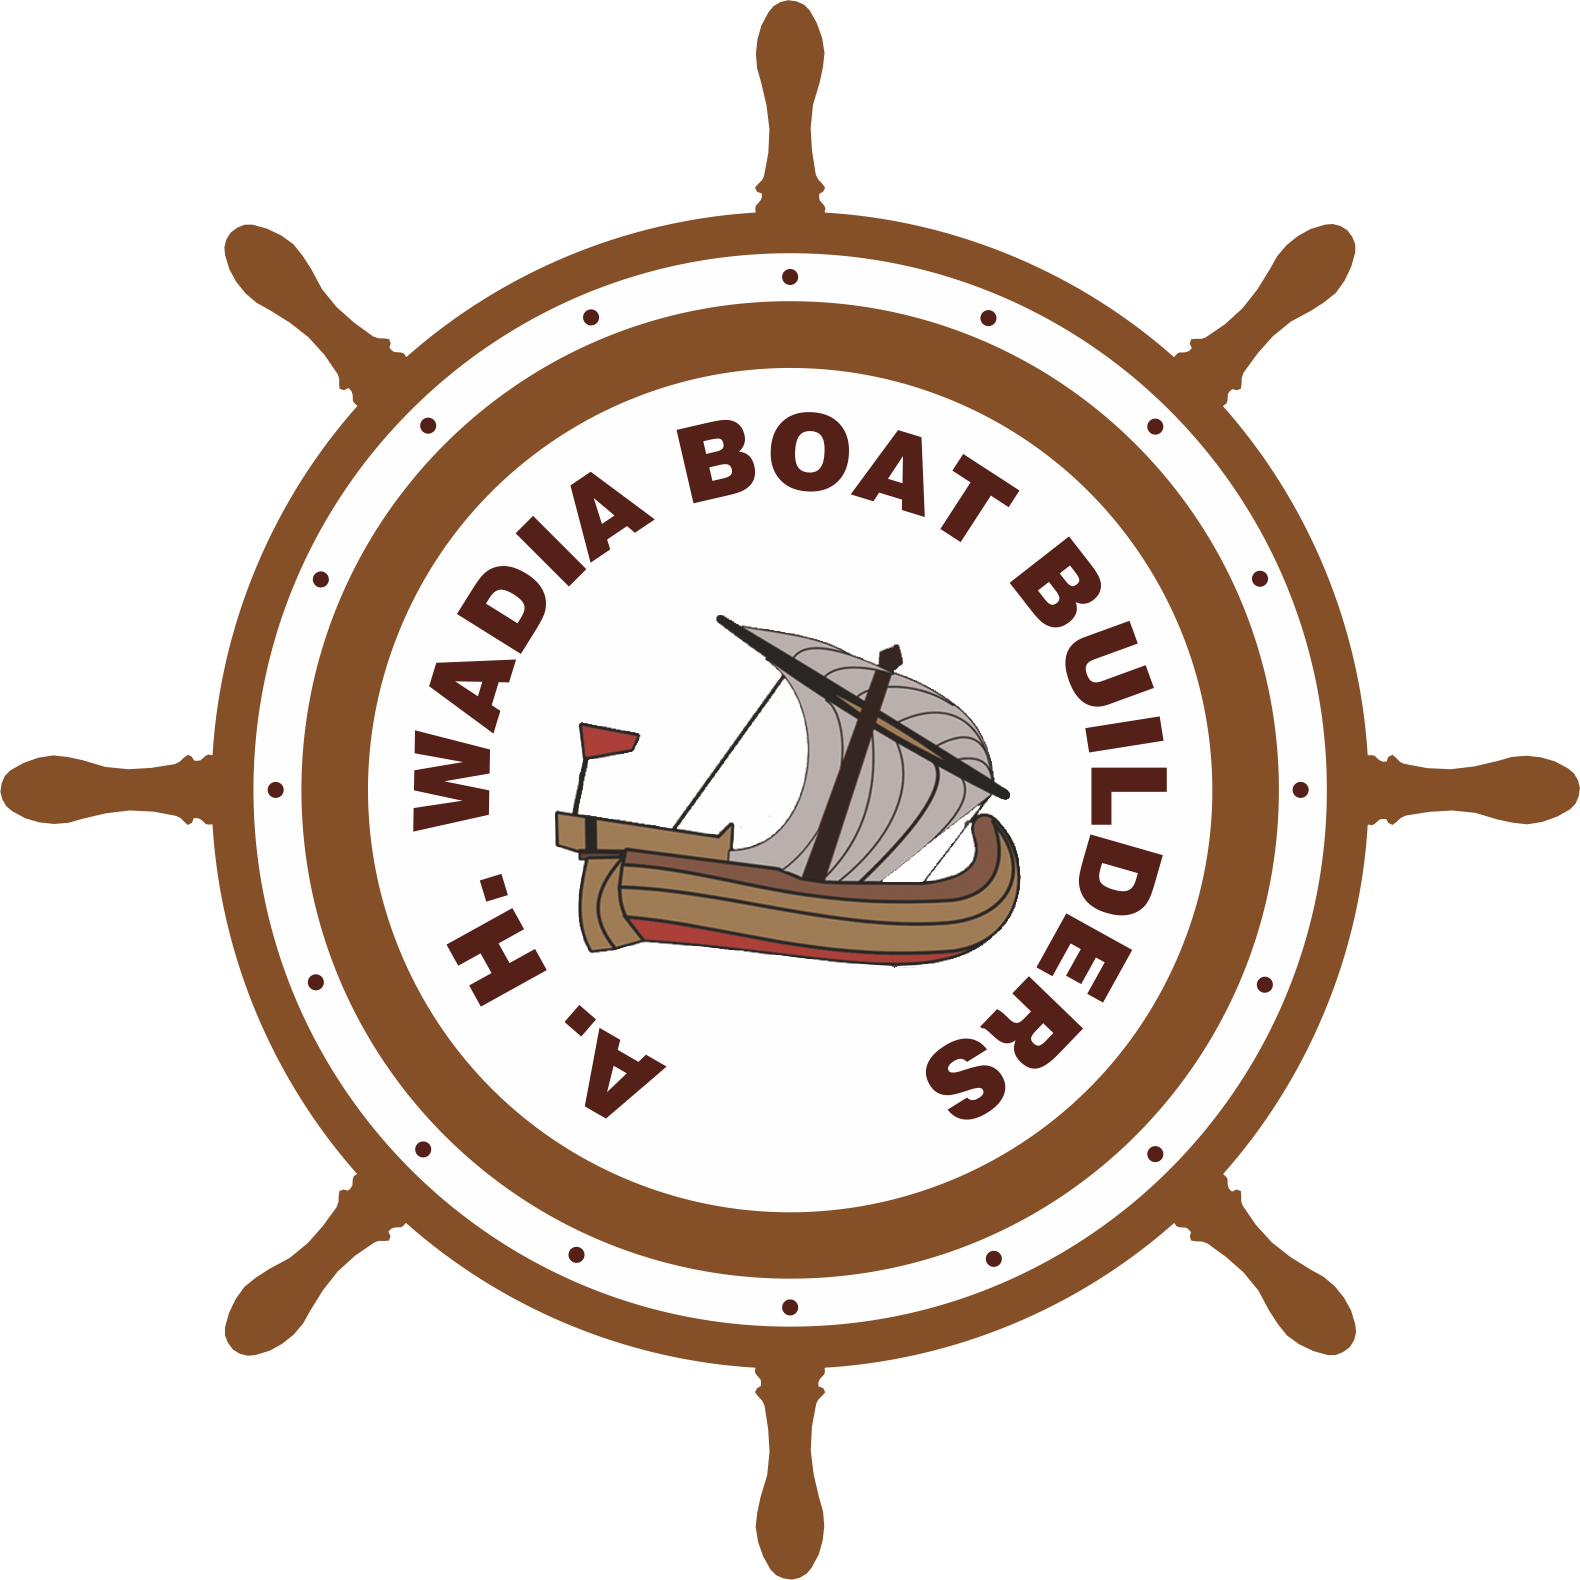 A. H. Wadia Boat Builders